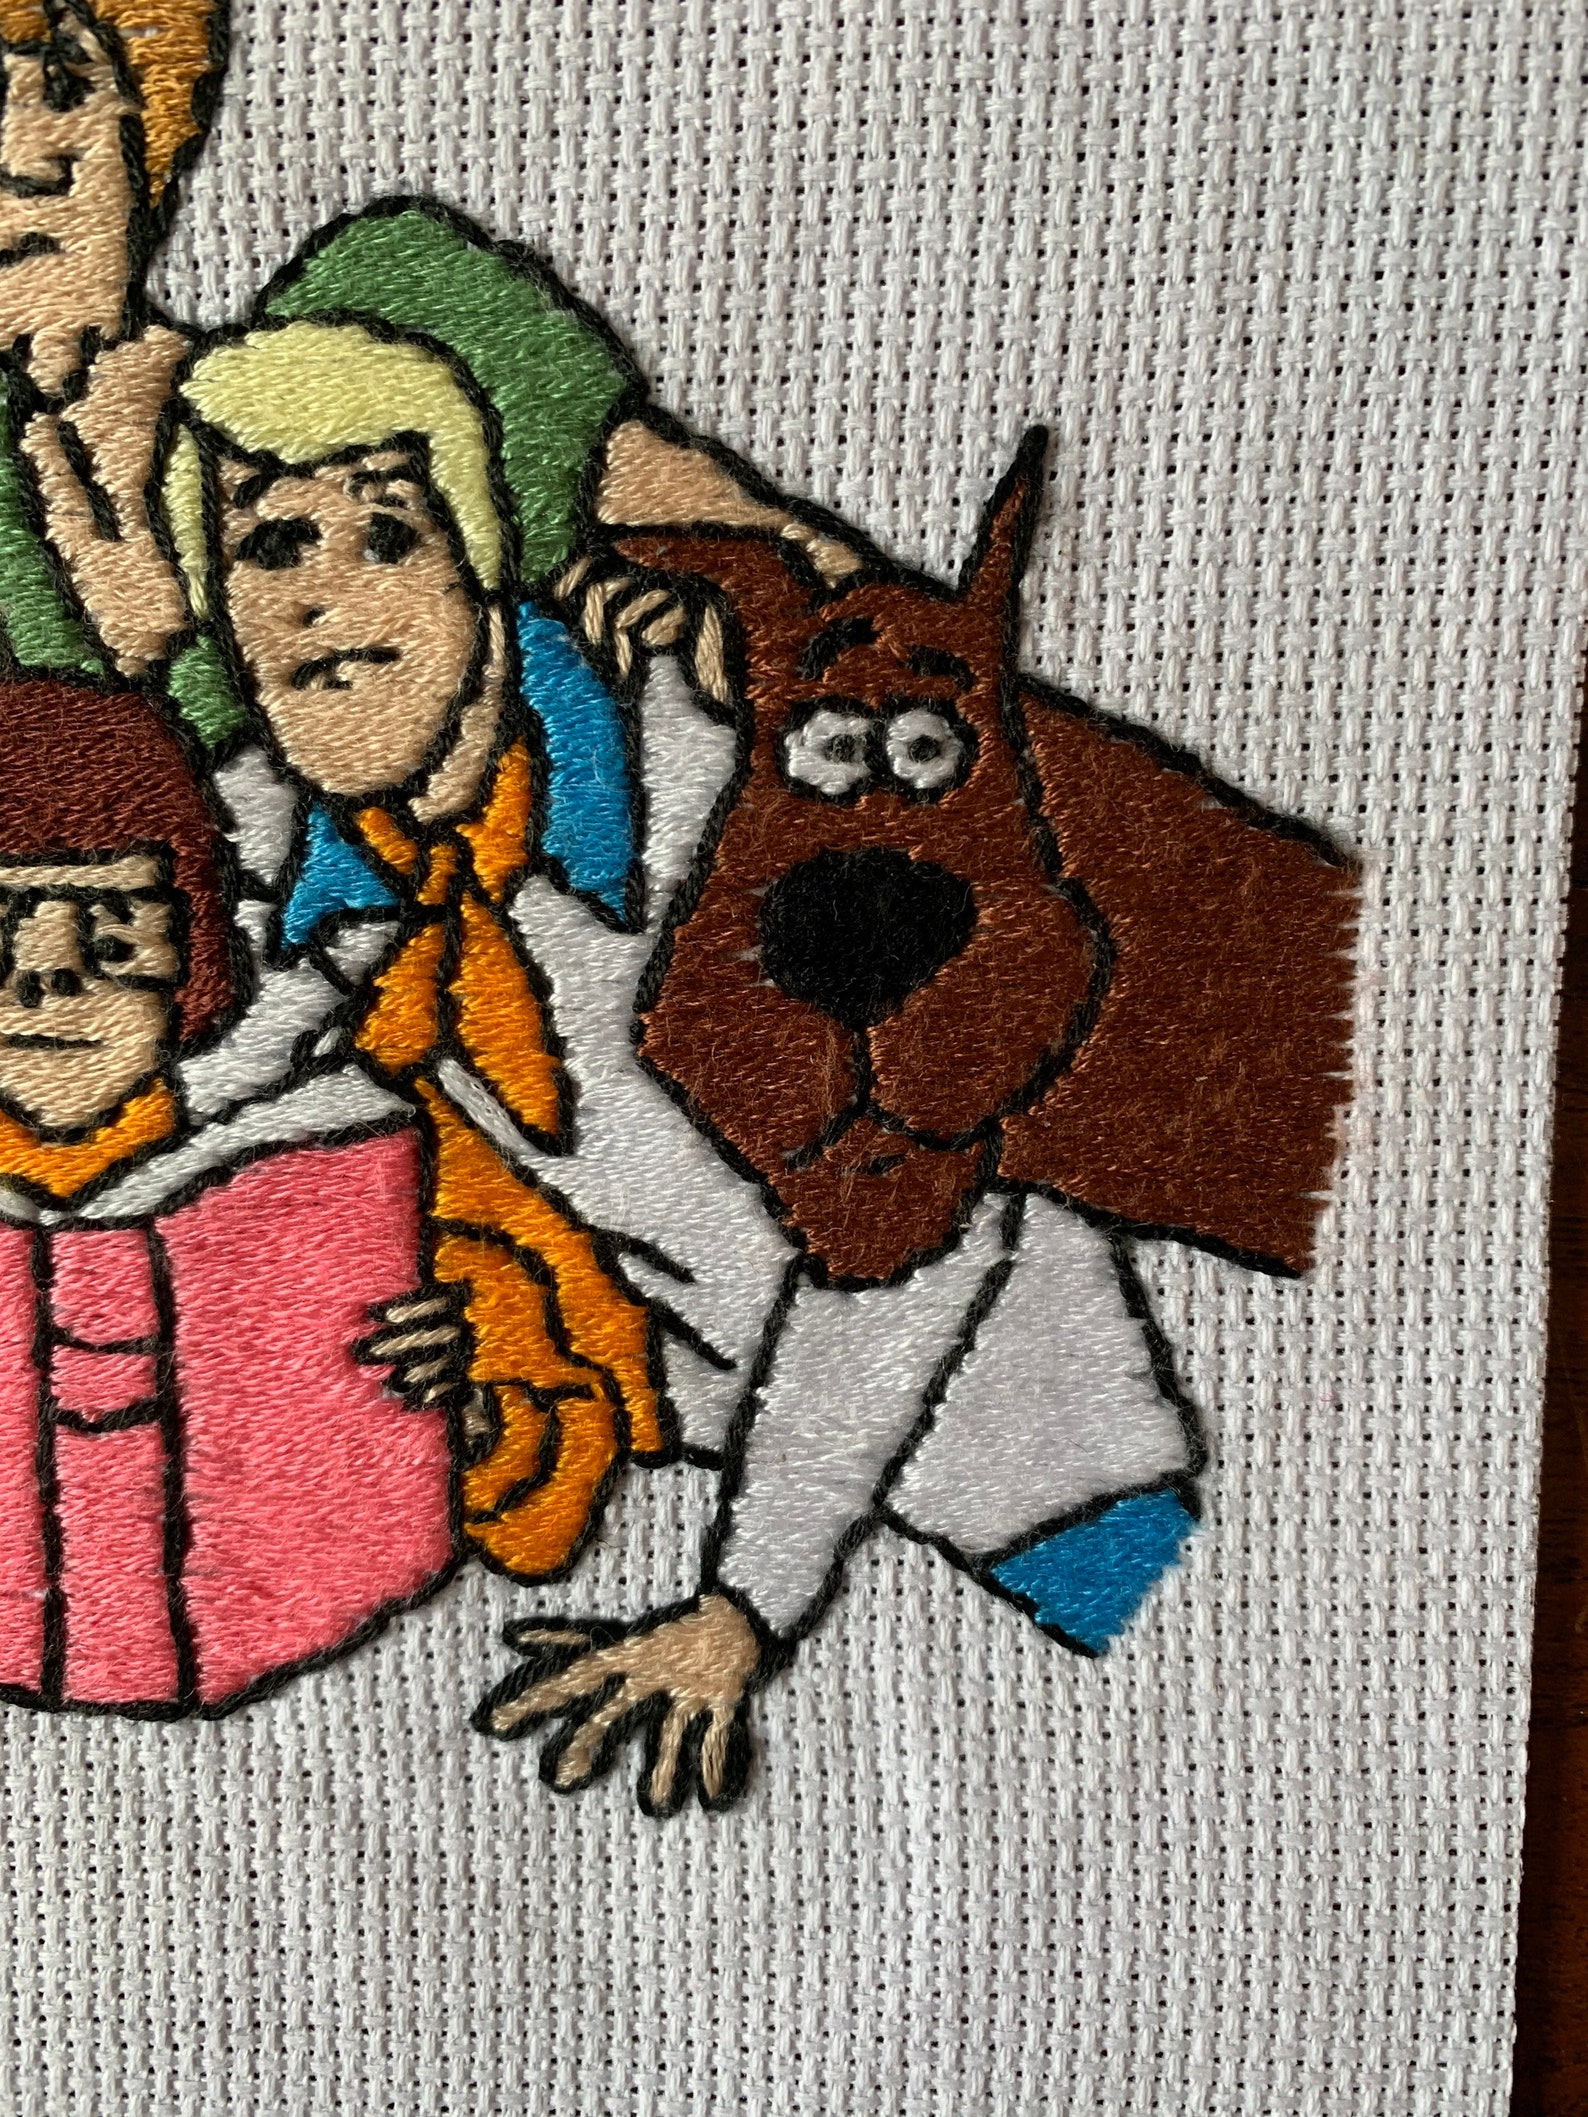 Scooby Doo Embroidery | Etsy